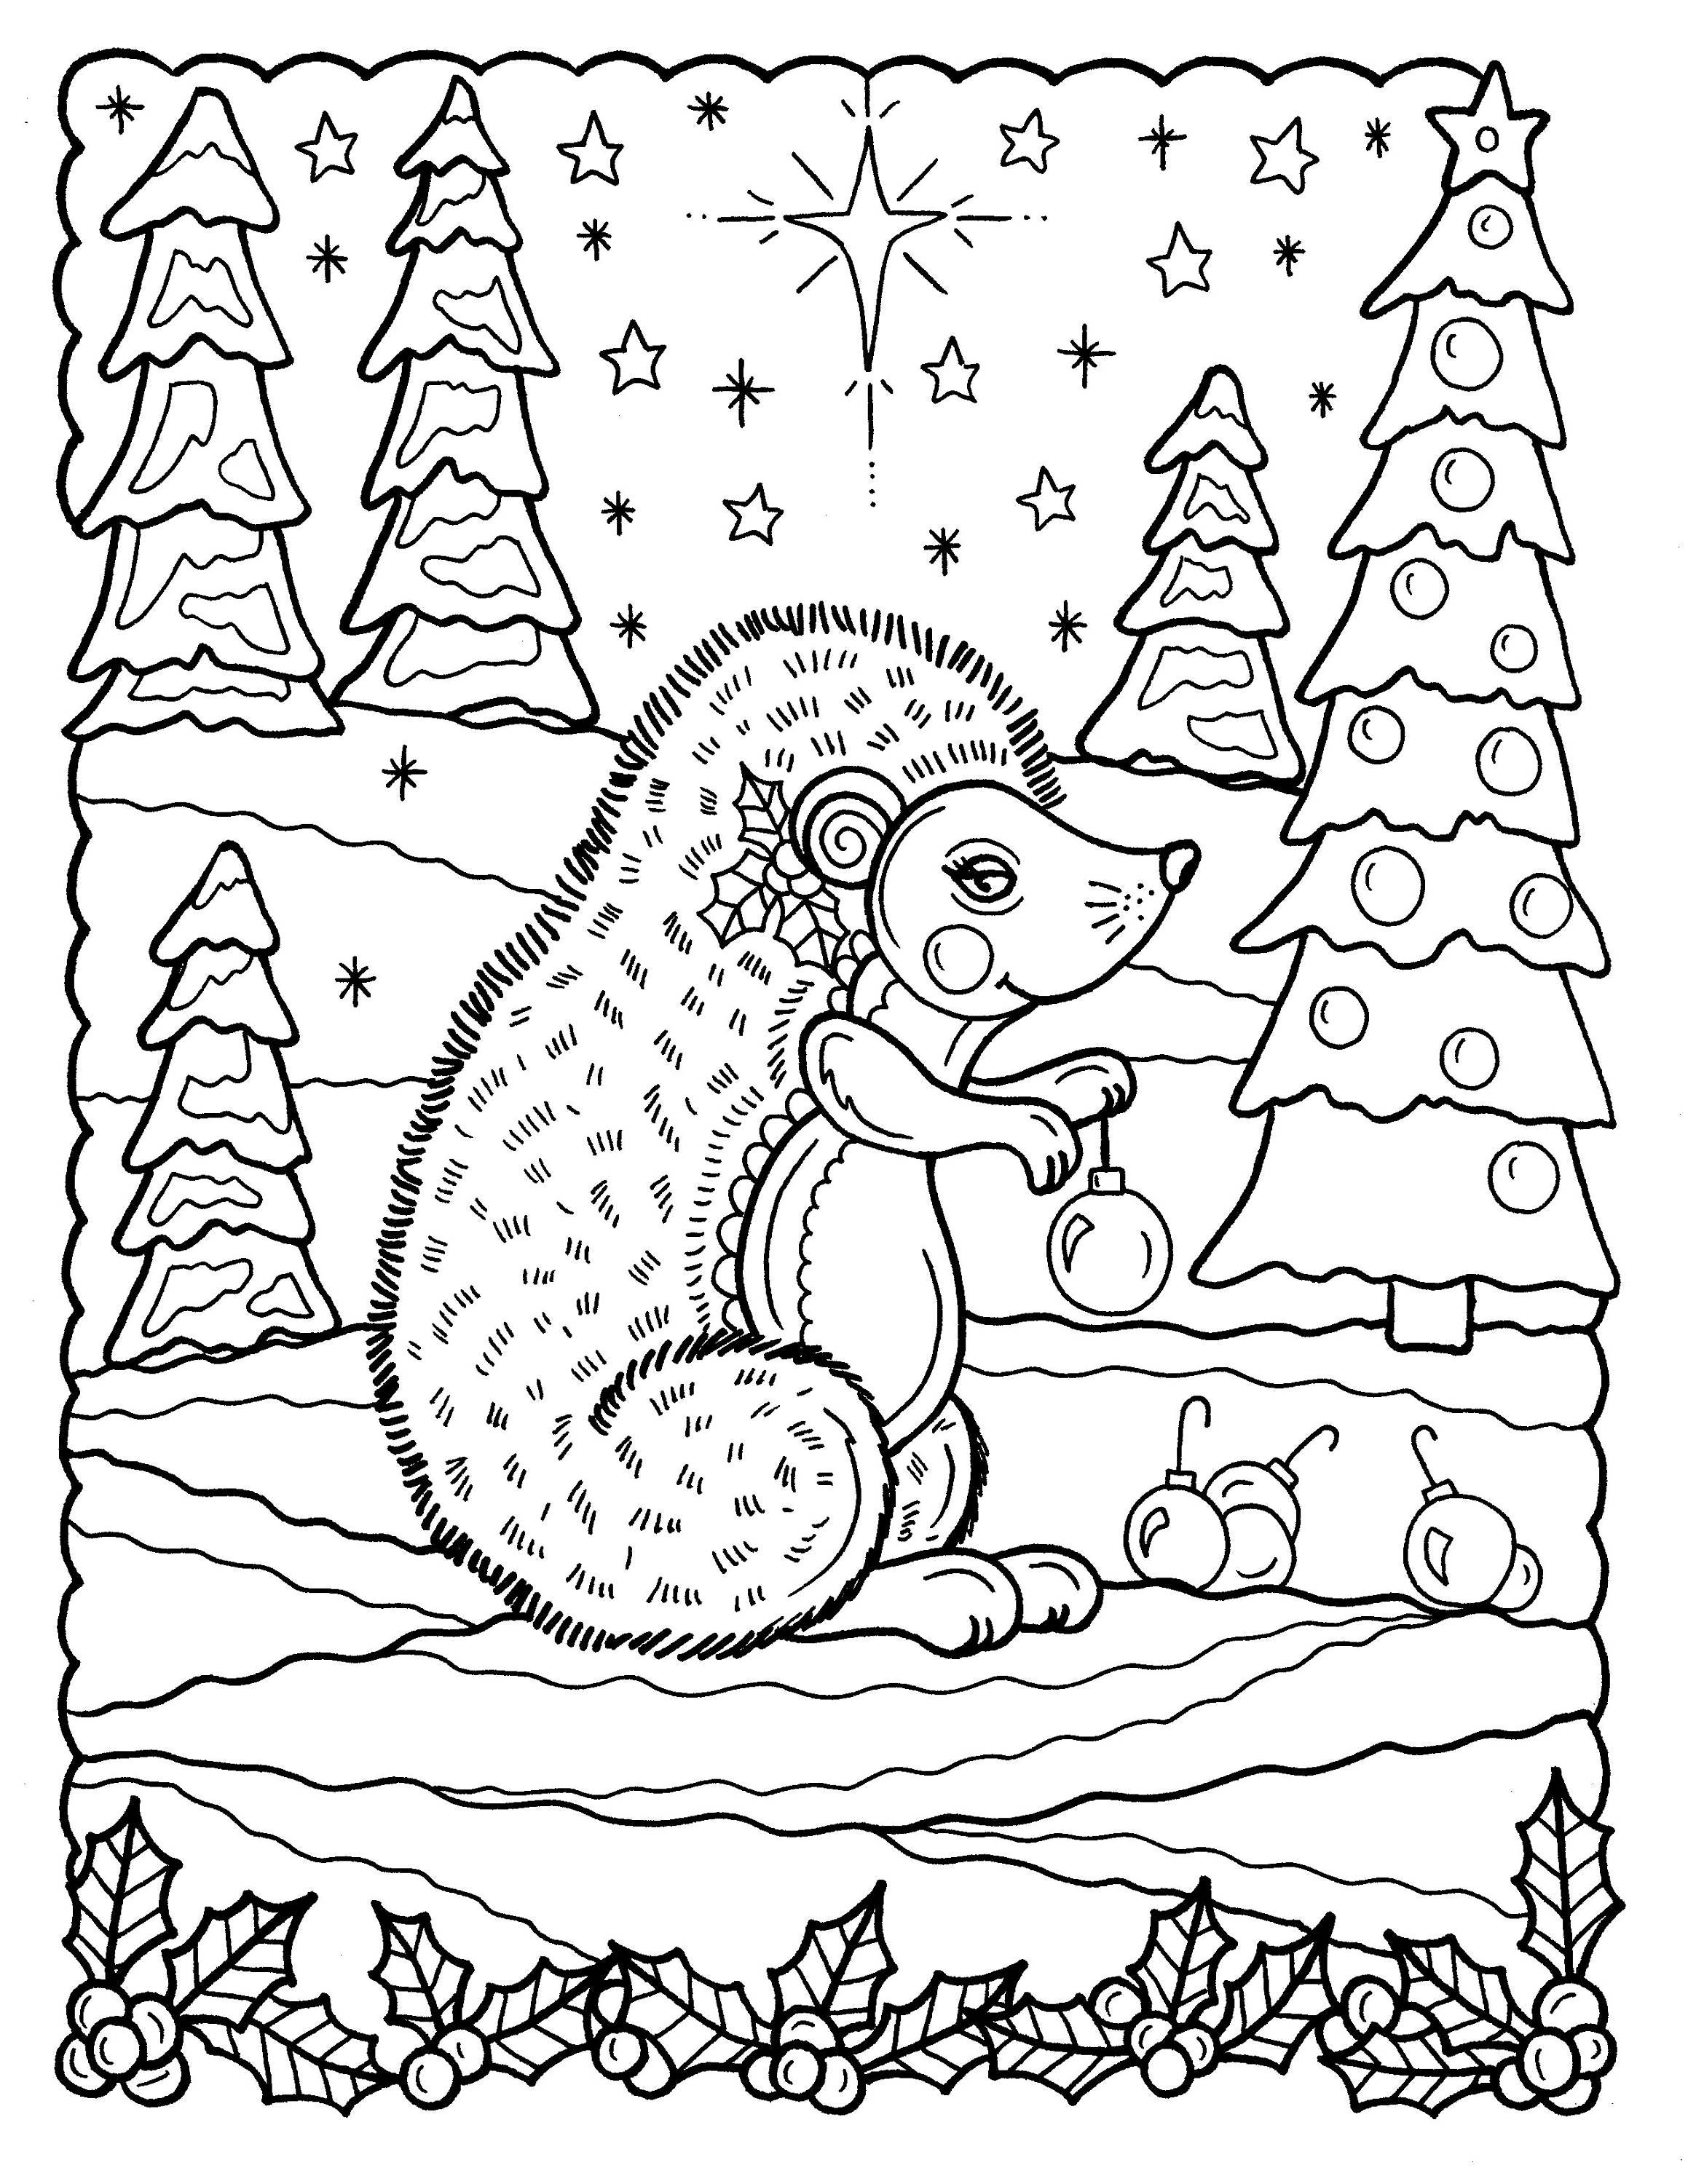 Download 5 Pages of Christmas Coloring pages fun and whimsical | Etsy